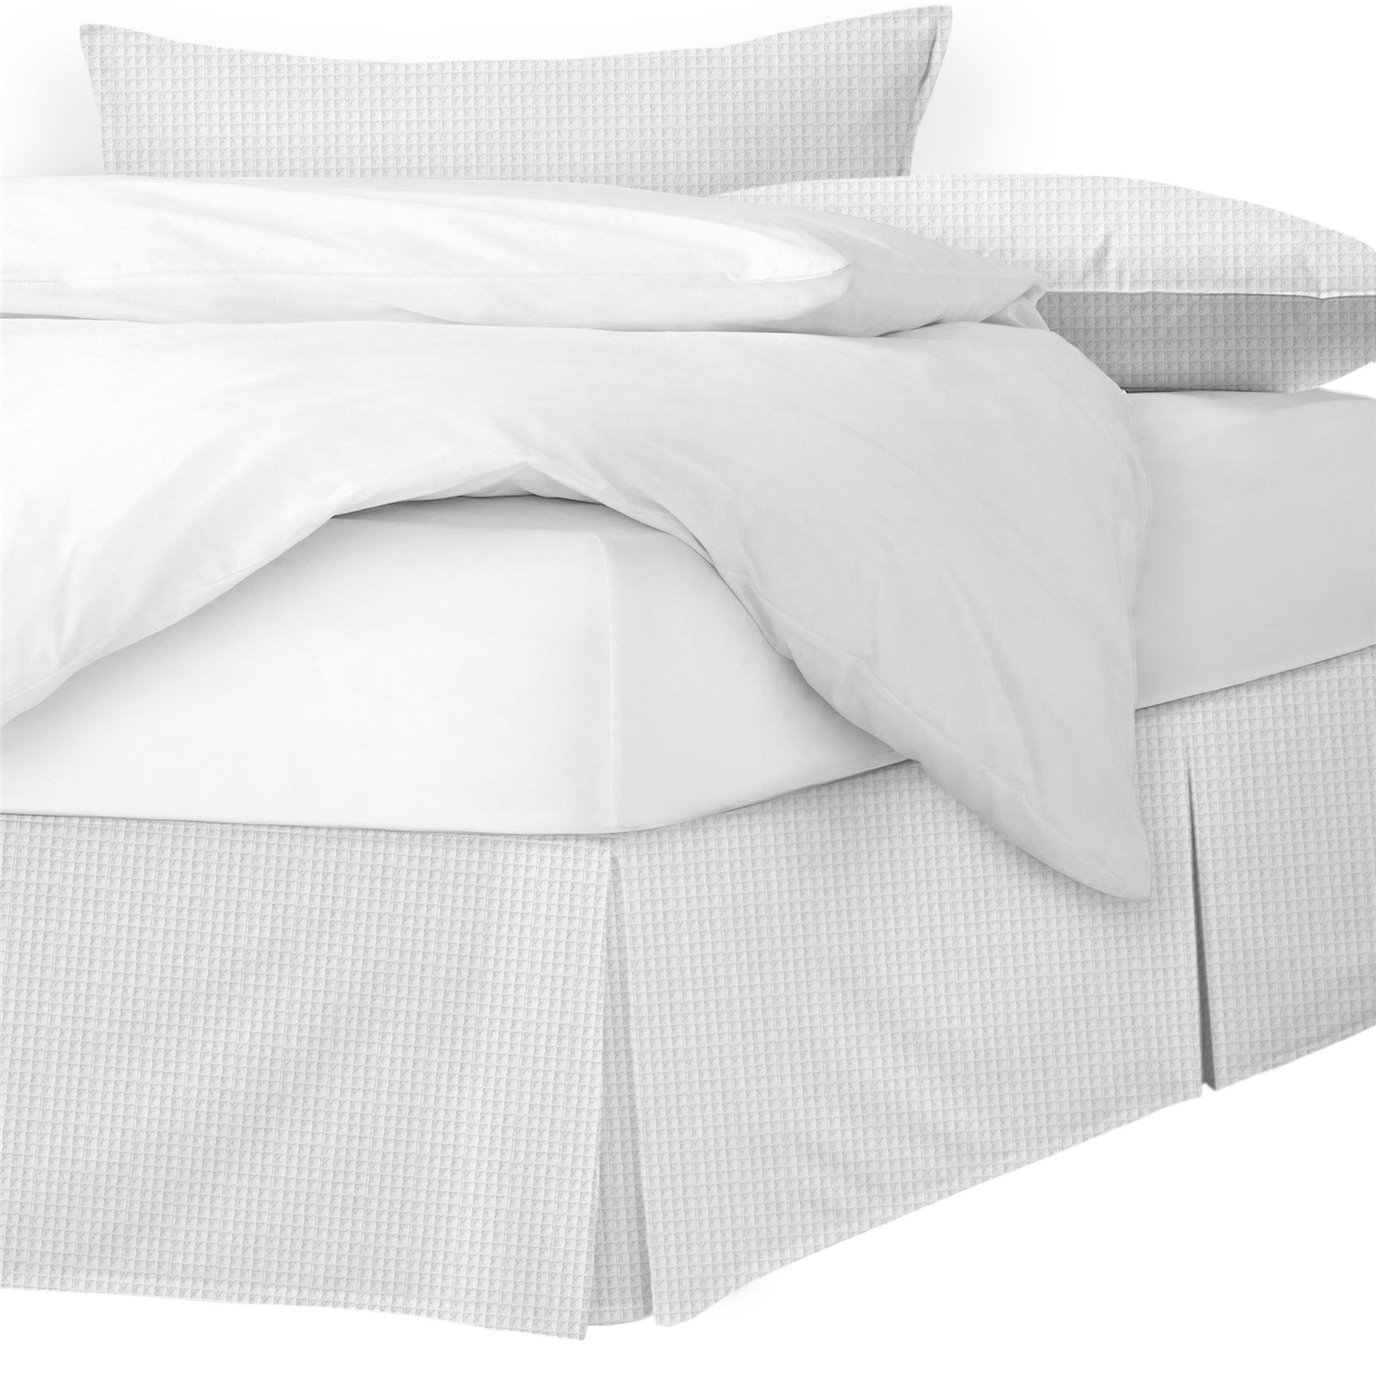 Classic Waffle White Platform Bed Skirt - Size King 15" Drop